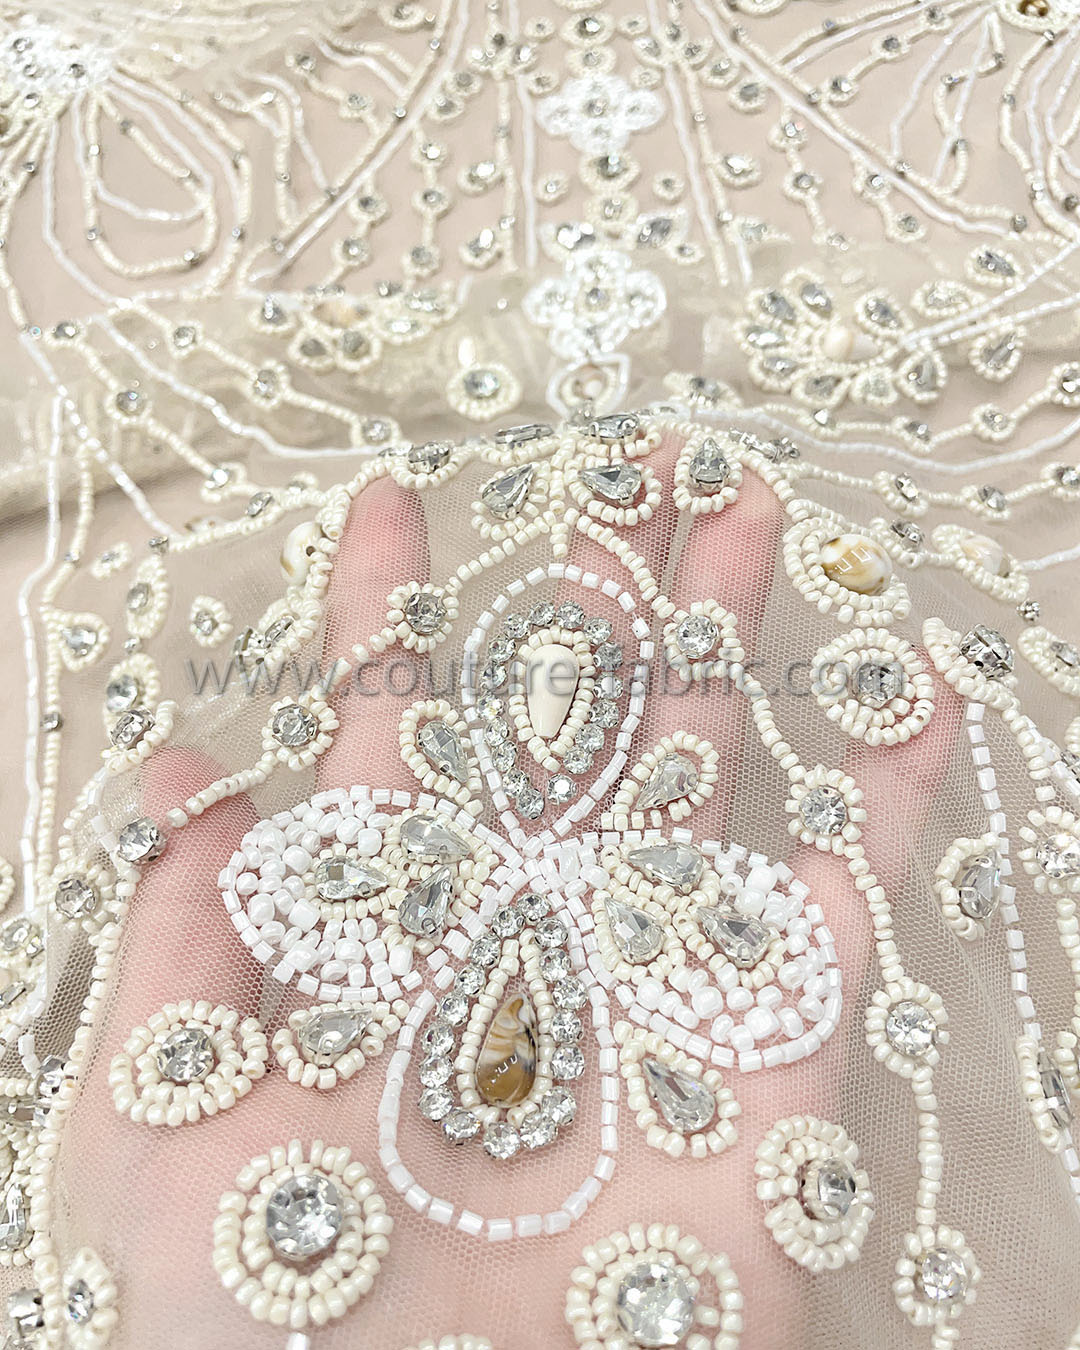 Skin color embroidery couture lace